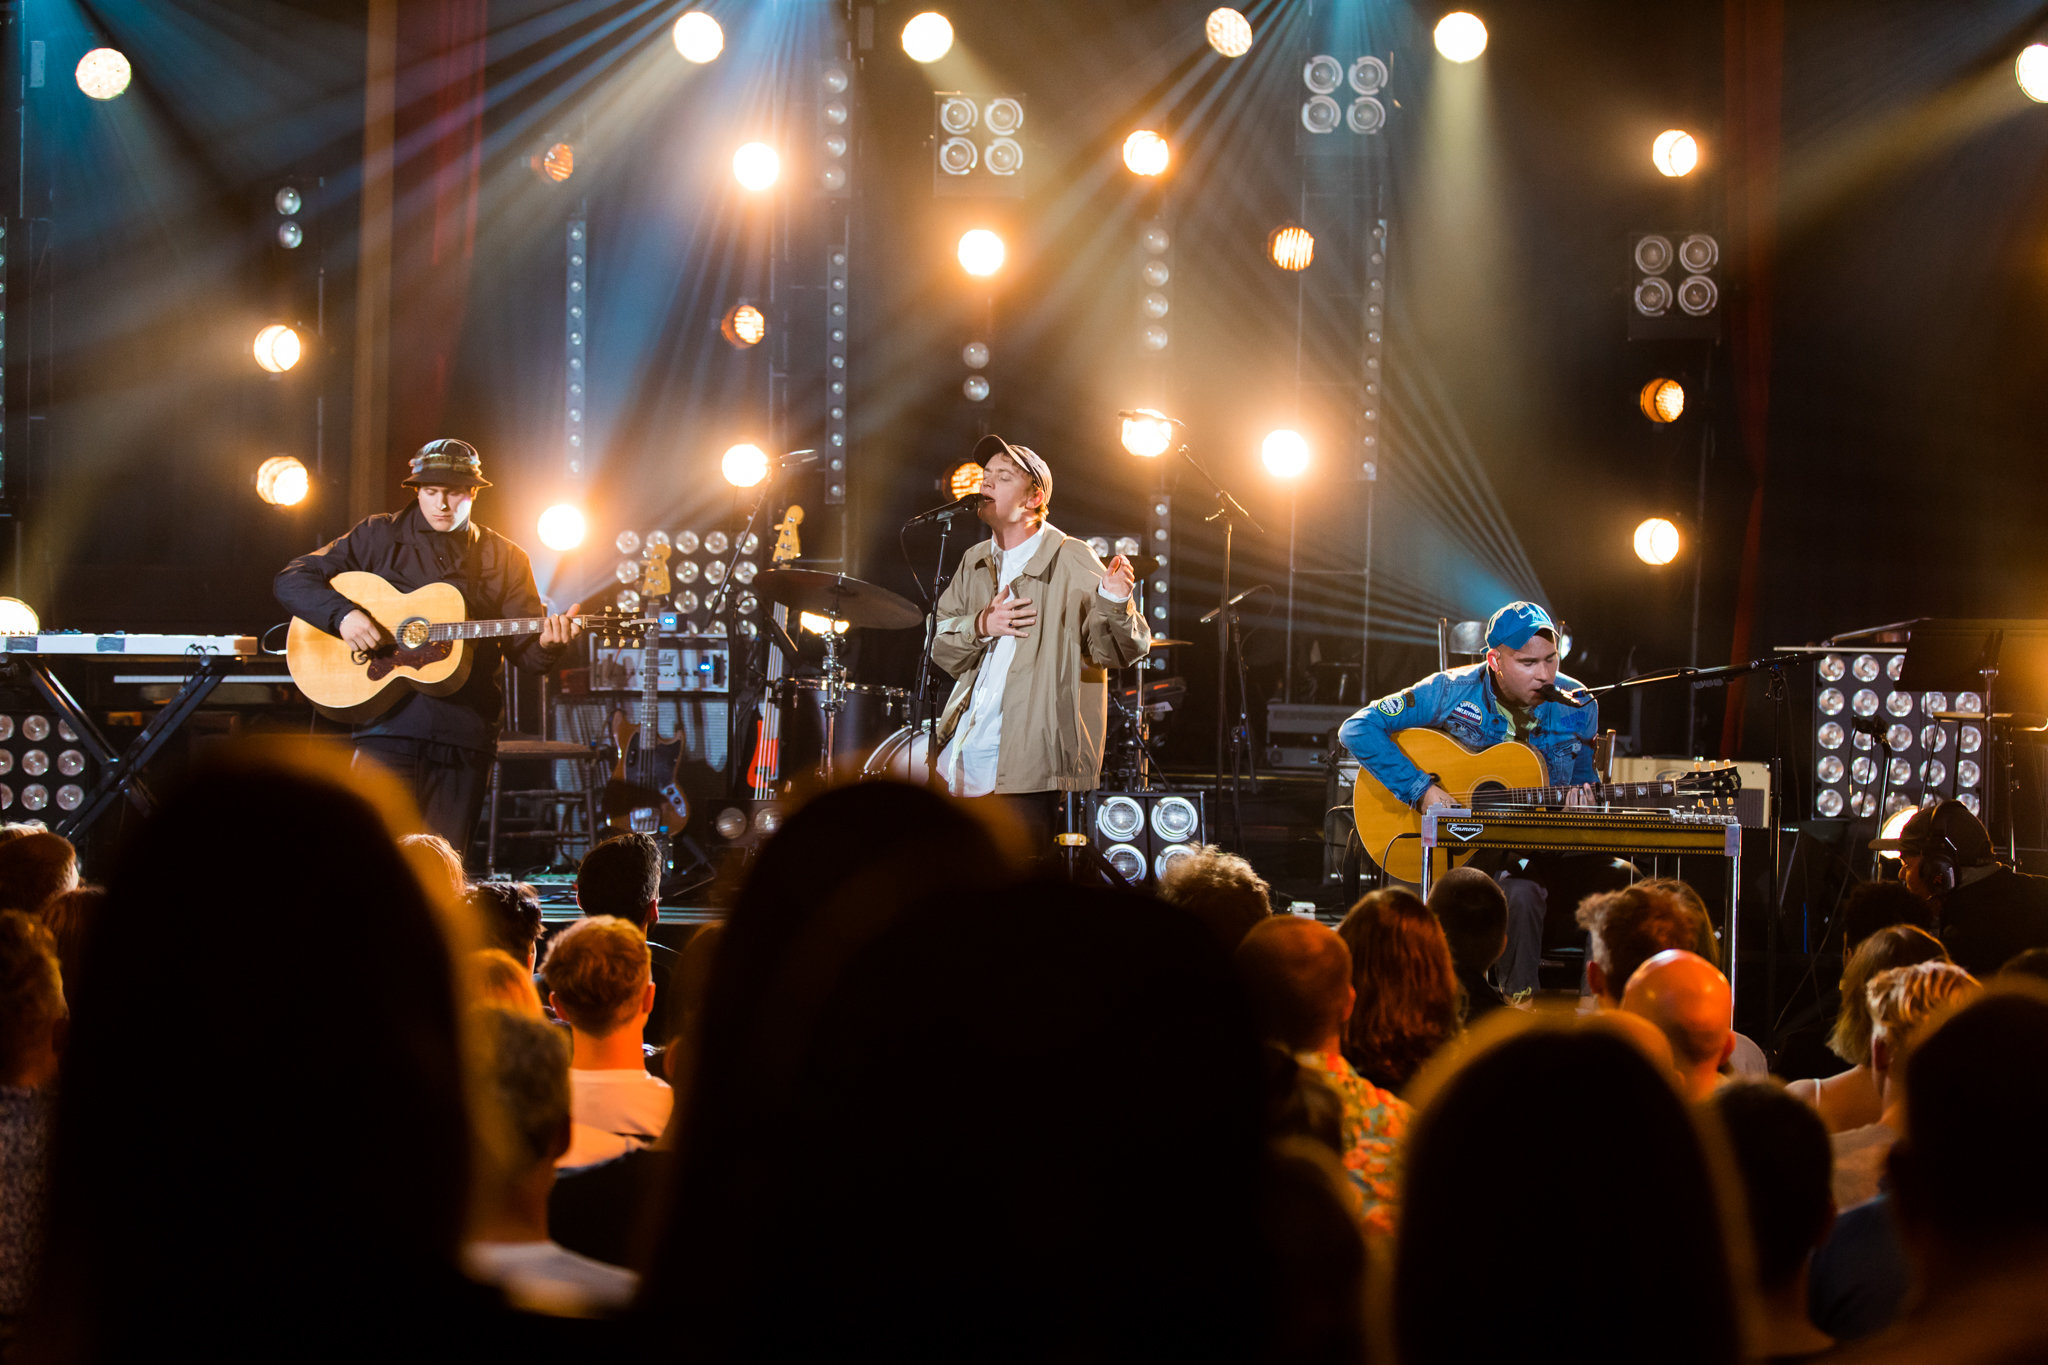 DMA’S MTV Unplugged (Live In Melbourne)  album is available on Friday 14 June